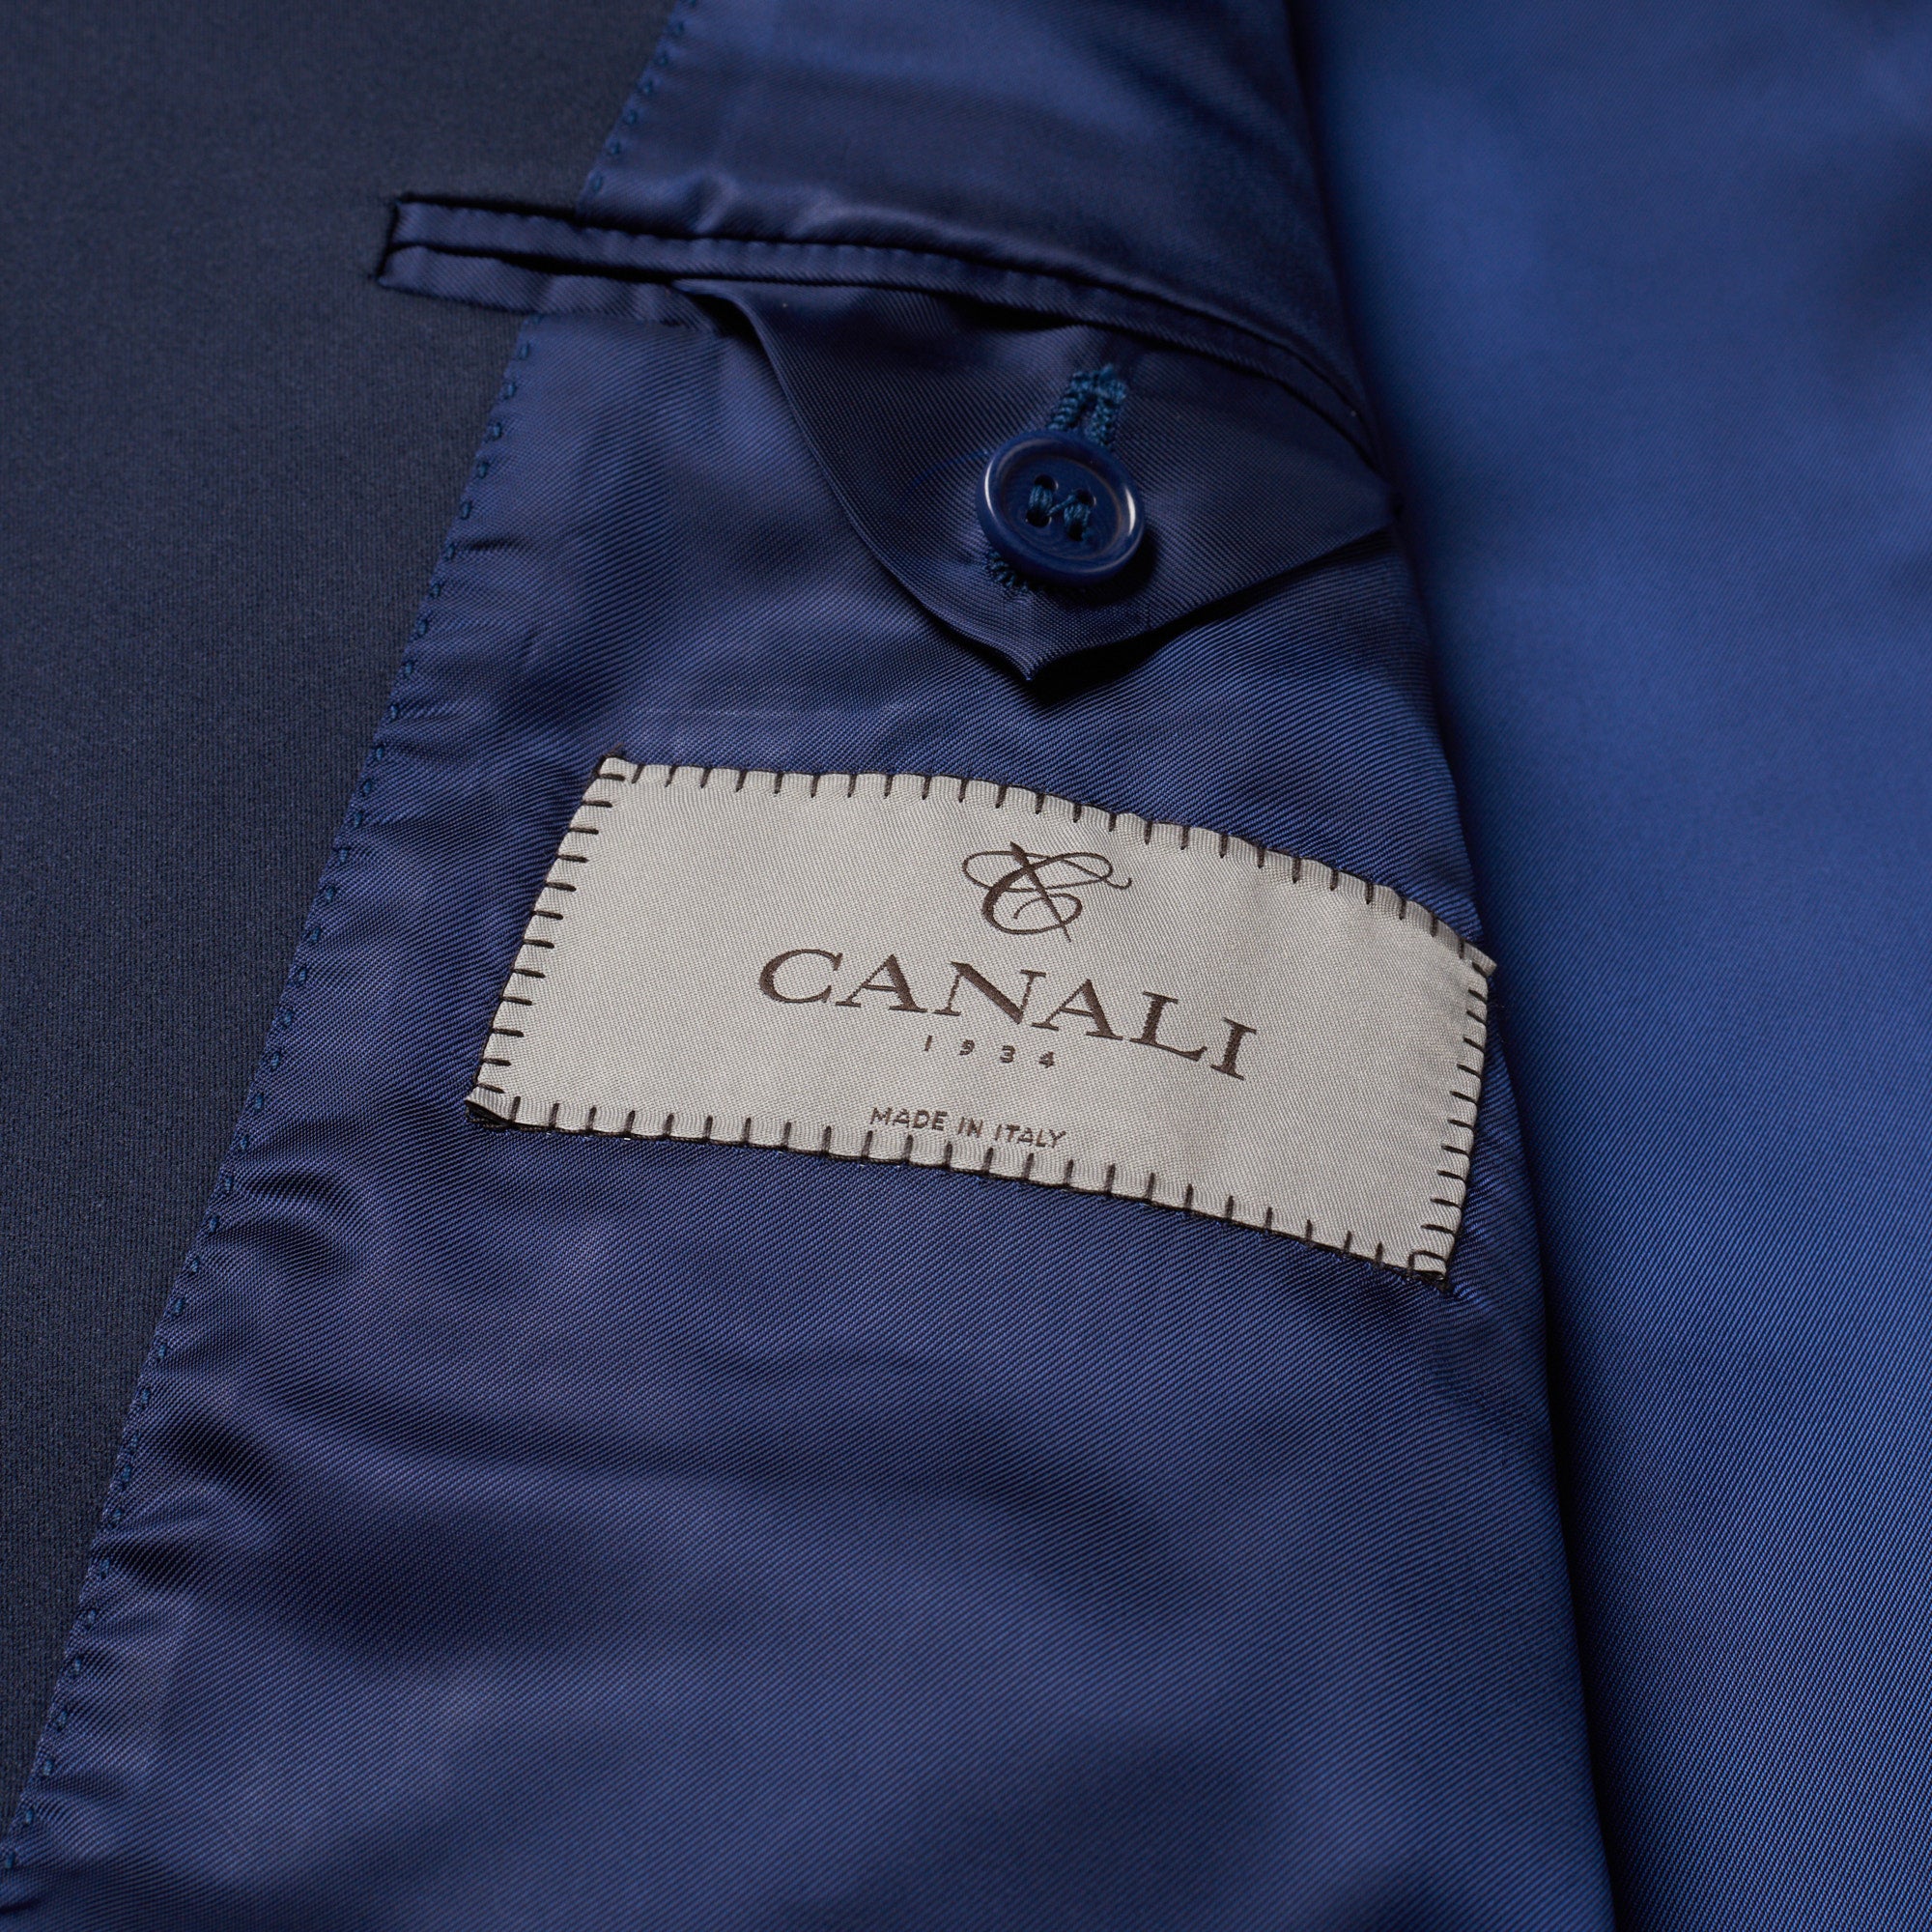 CANALI 1934 Navy Blue Water Resistant Wool 1 Button Formal Suit EU 50 US 40 Slim Fit CANALI